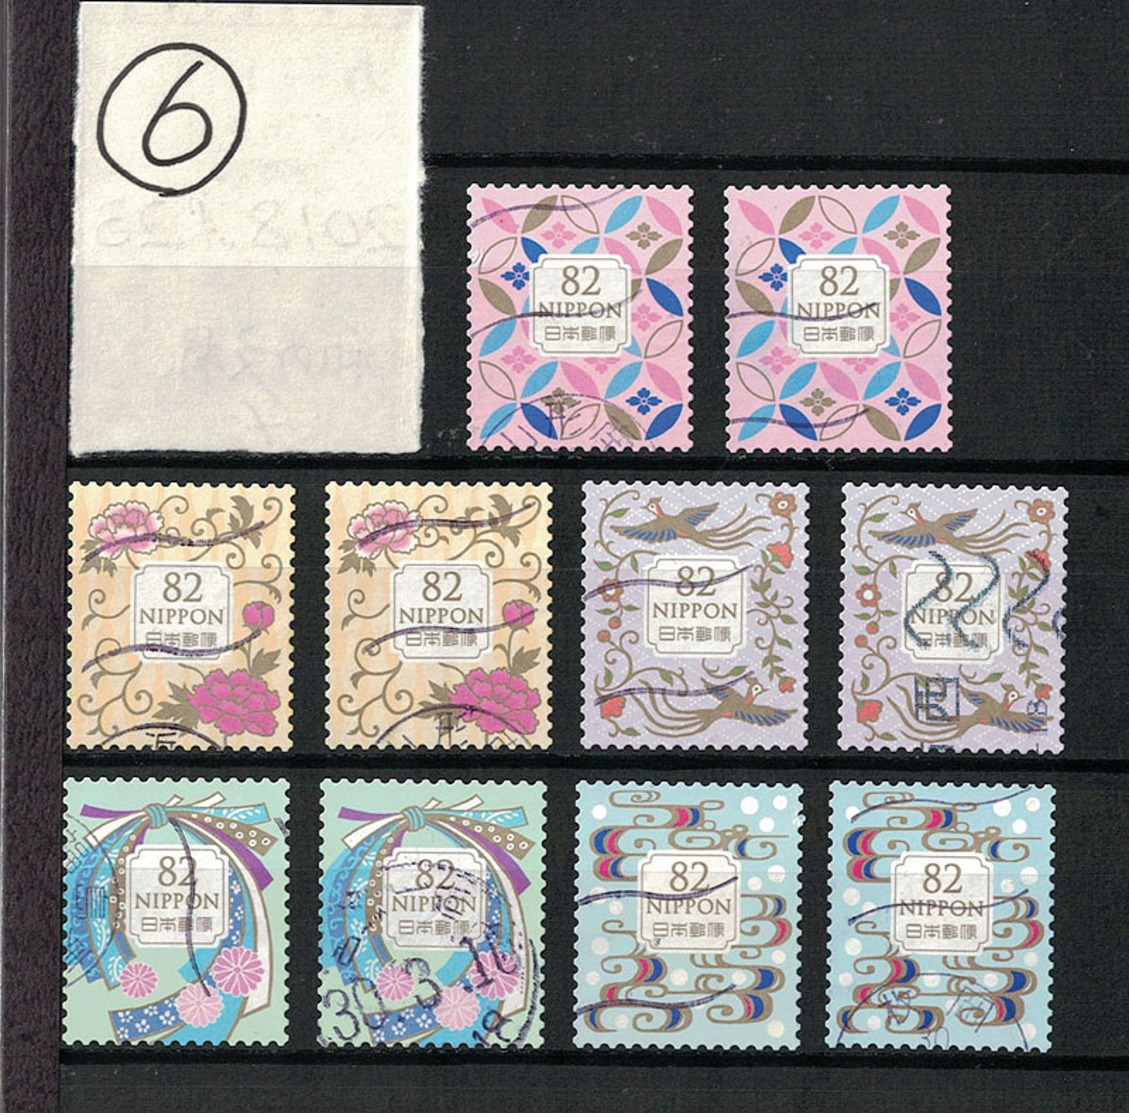 Japan 2018.01.23 Traditional Japanese Design Series 4th (used)⑥ - Used Stamps